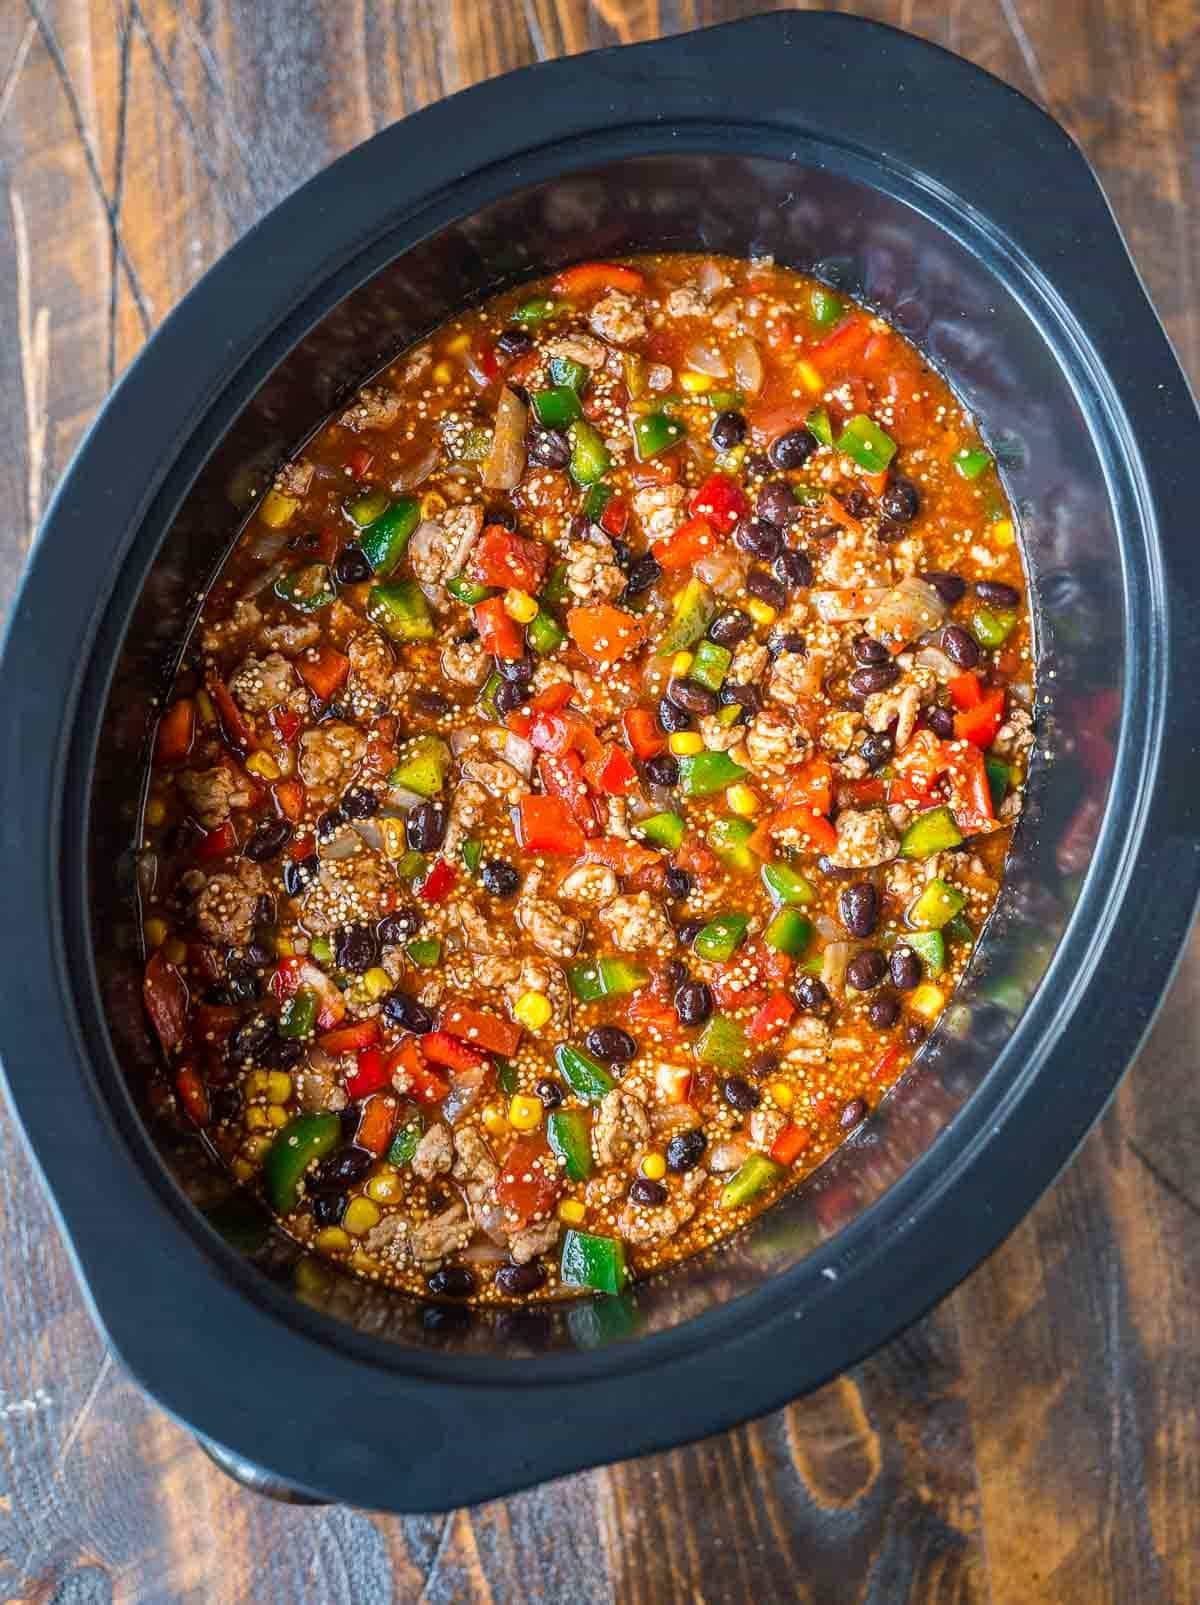 Slow Cooker Ground Beef Recipes Healthy
 Crock Pot Mexican Casserole Recipe